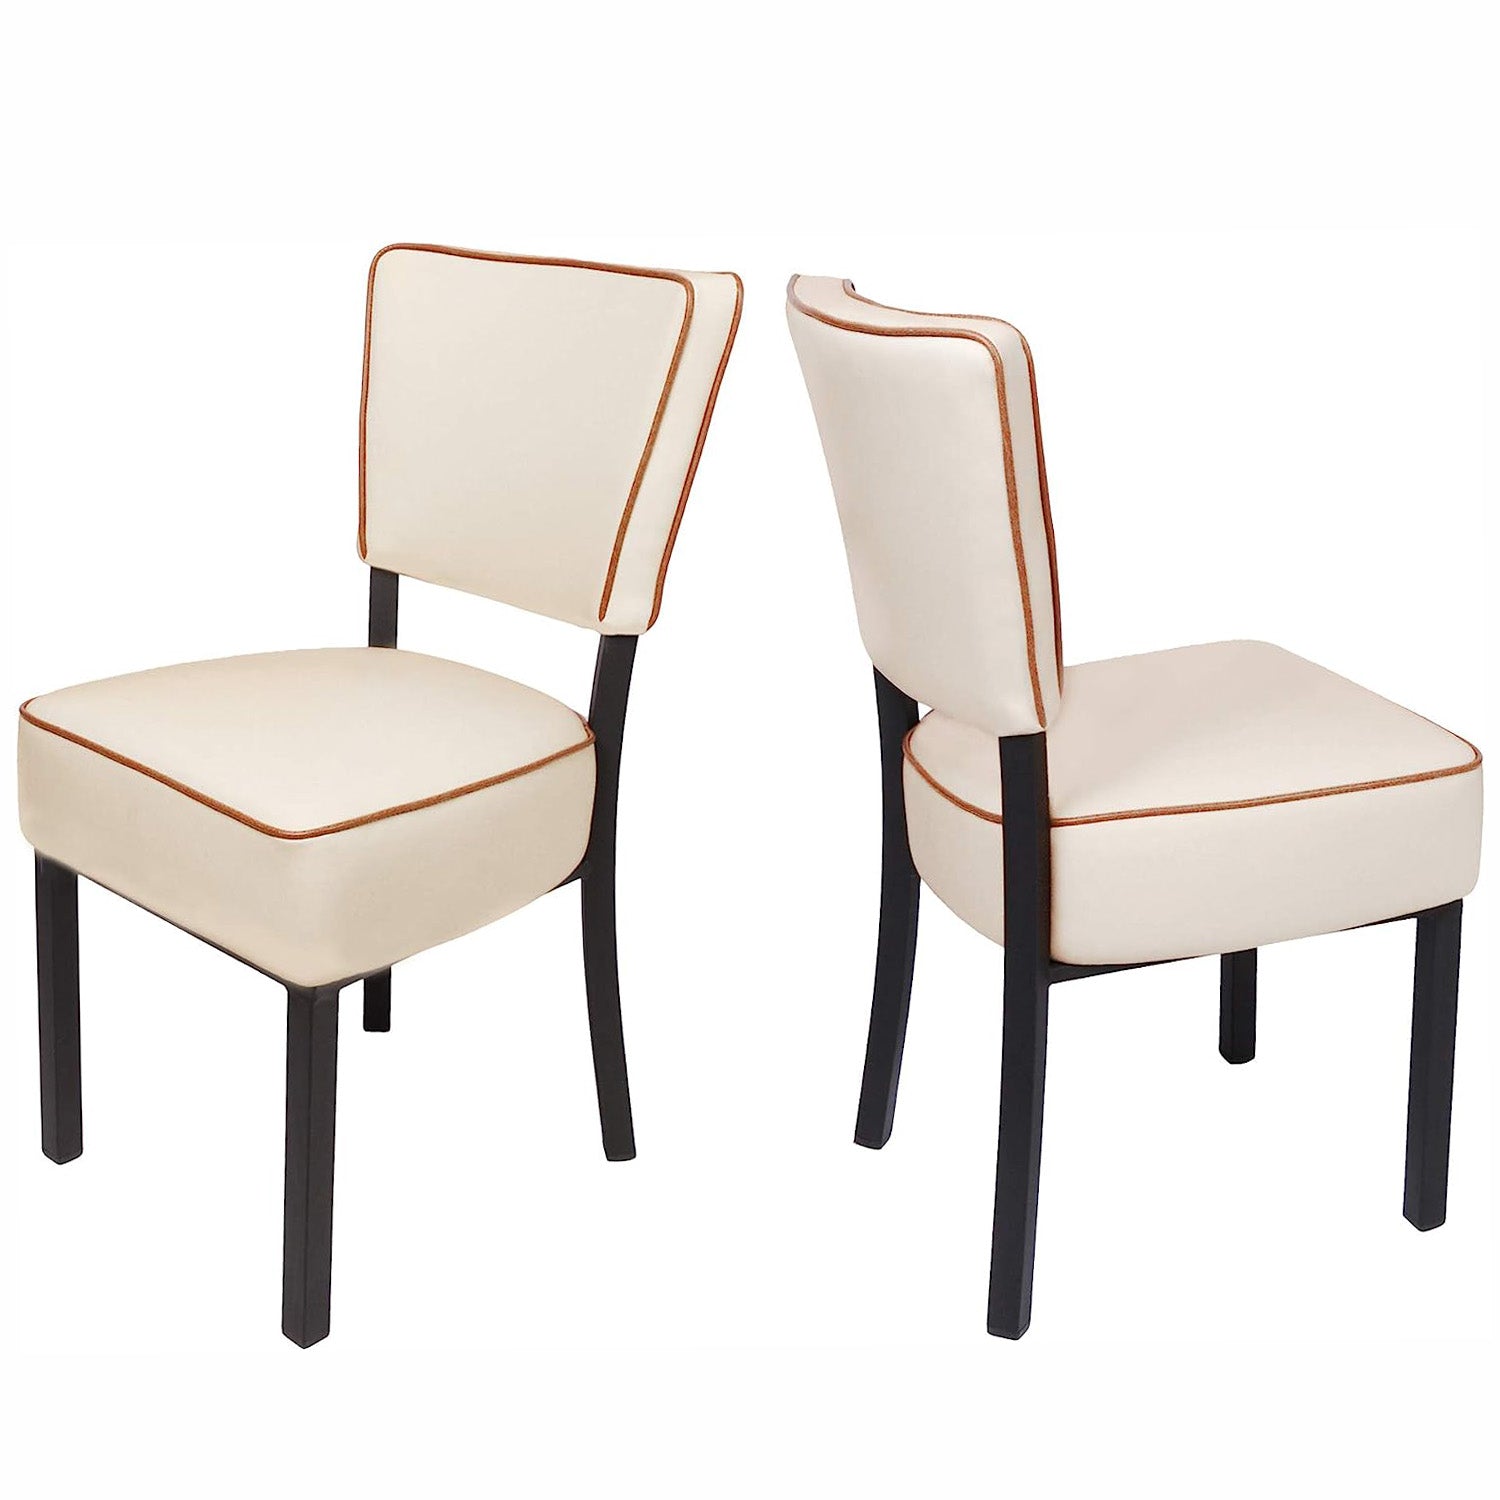 LUCKYERMORE Set of 2 Leather Side Chairs Kitchen Dining Chairs with Upholstered and Backrest, Beige